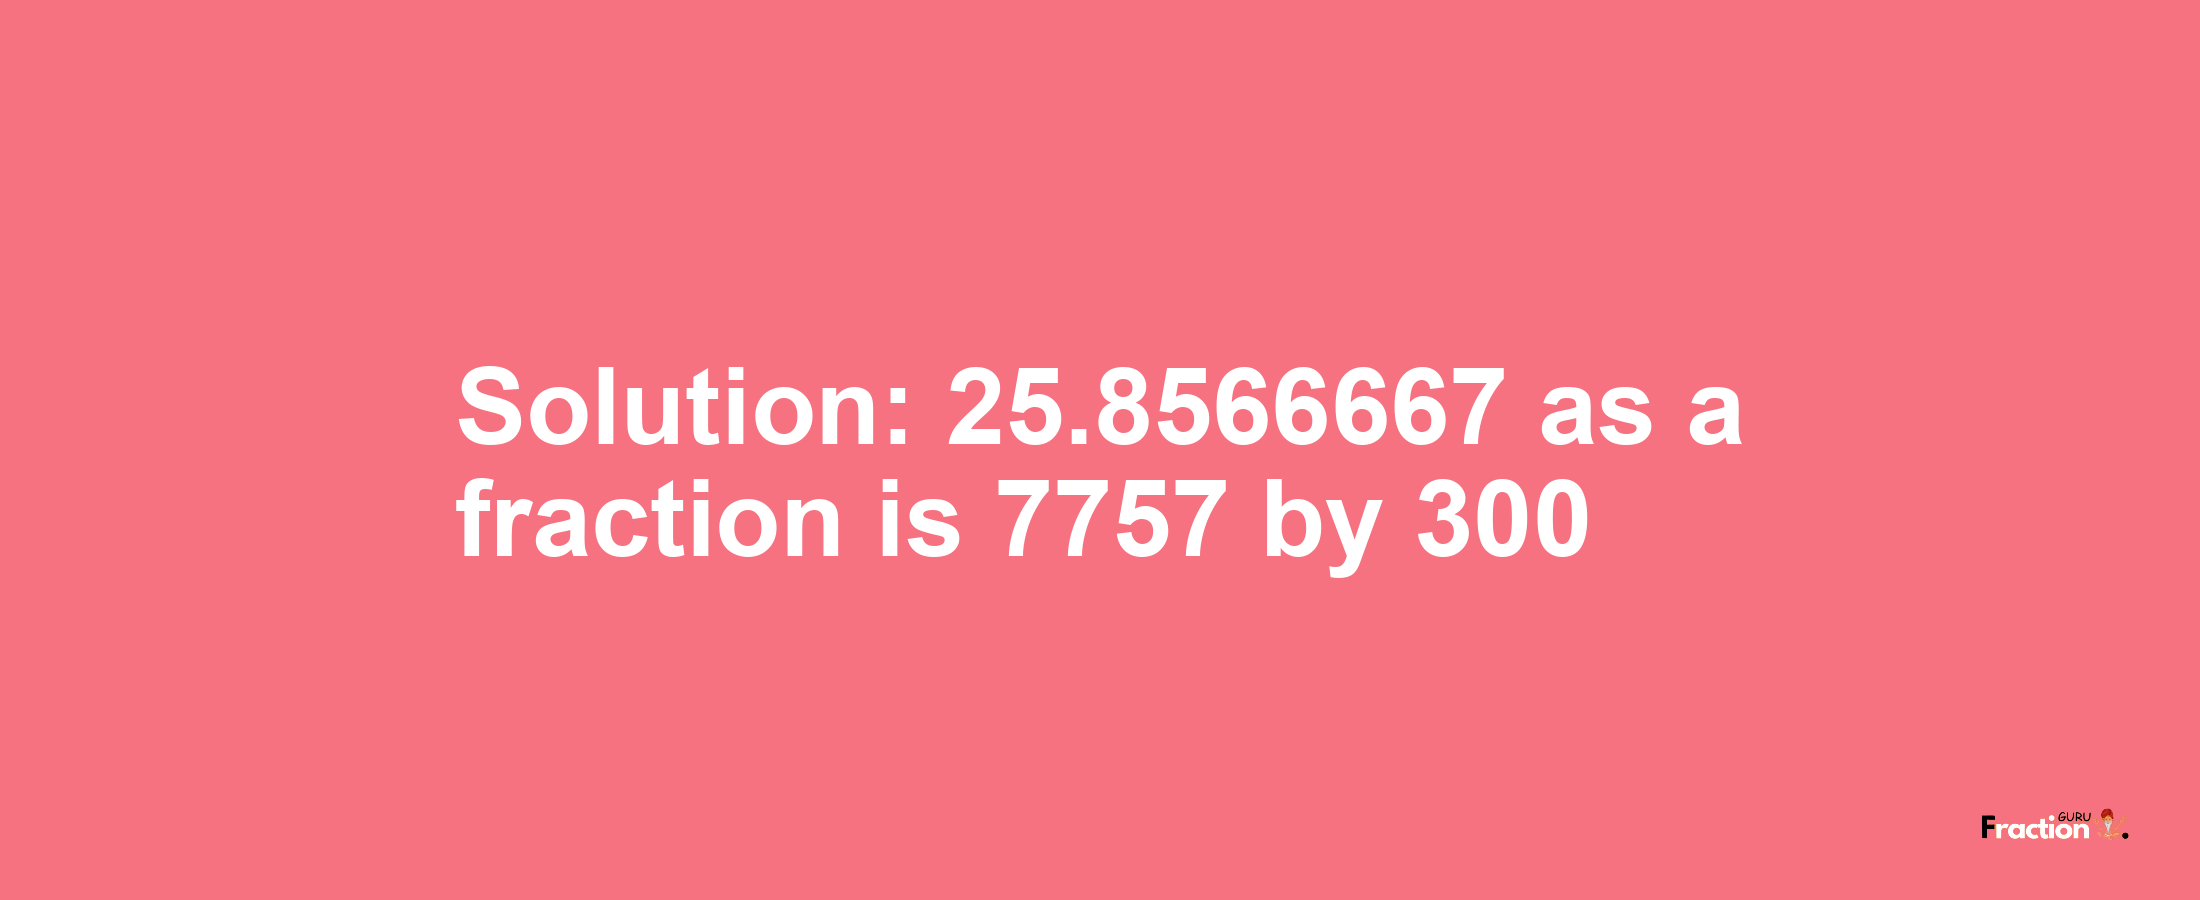 Solution:25.8566667 as a fraction is 7757/300